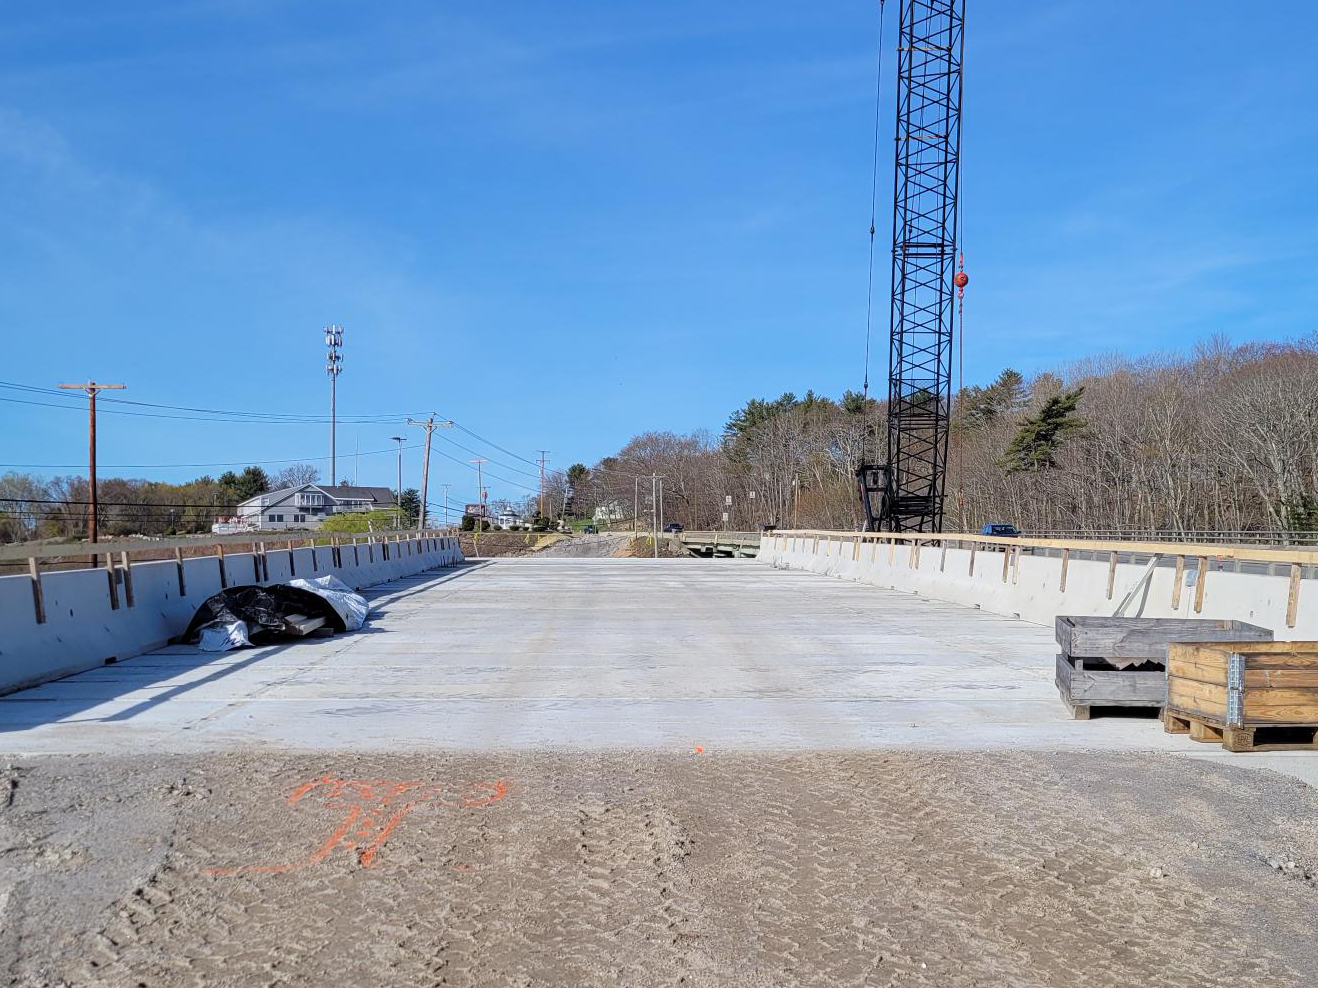 View of the bridge deck of the temporary Station 46 Bridge, looking south towards the Taste of Maine Restaurant.